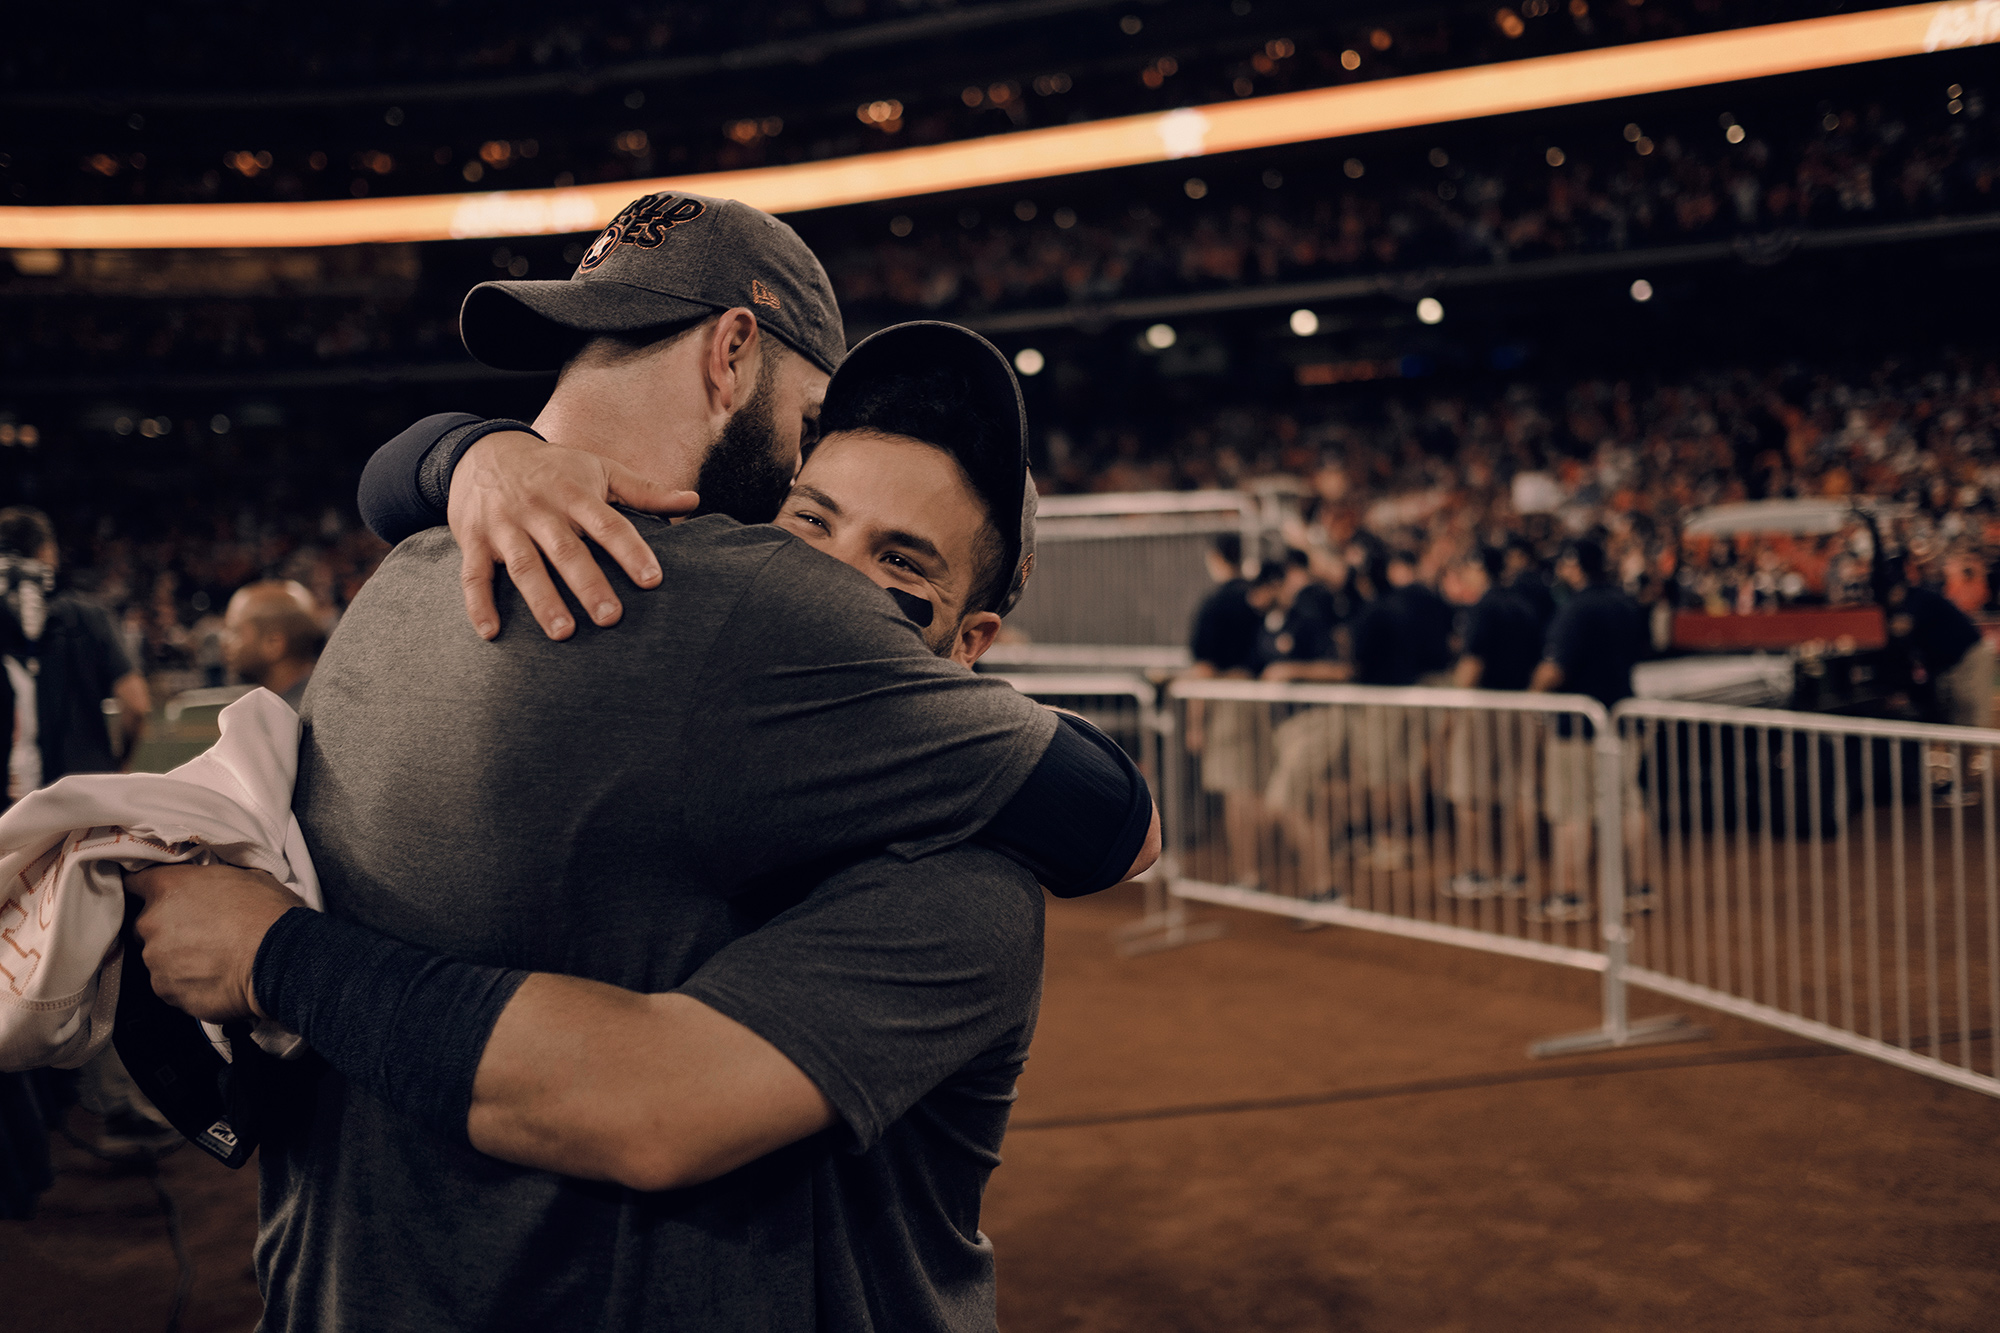 Jose Altuve, Houston Astros player, embraces teammate, Dallas Keuchel, during the 2017 ALCS at Minute Maid Park in Houston, Texas photographed by Todd Spoth.